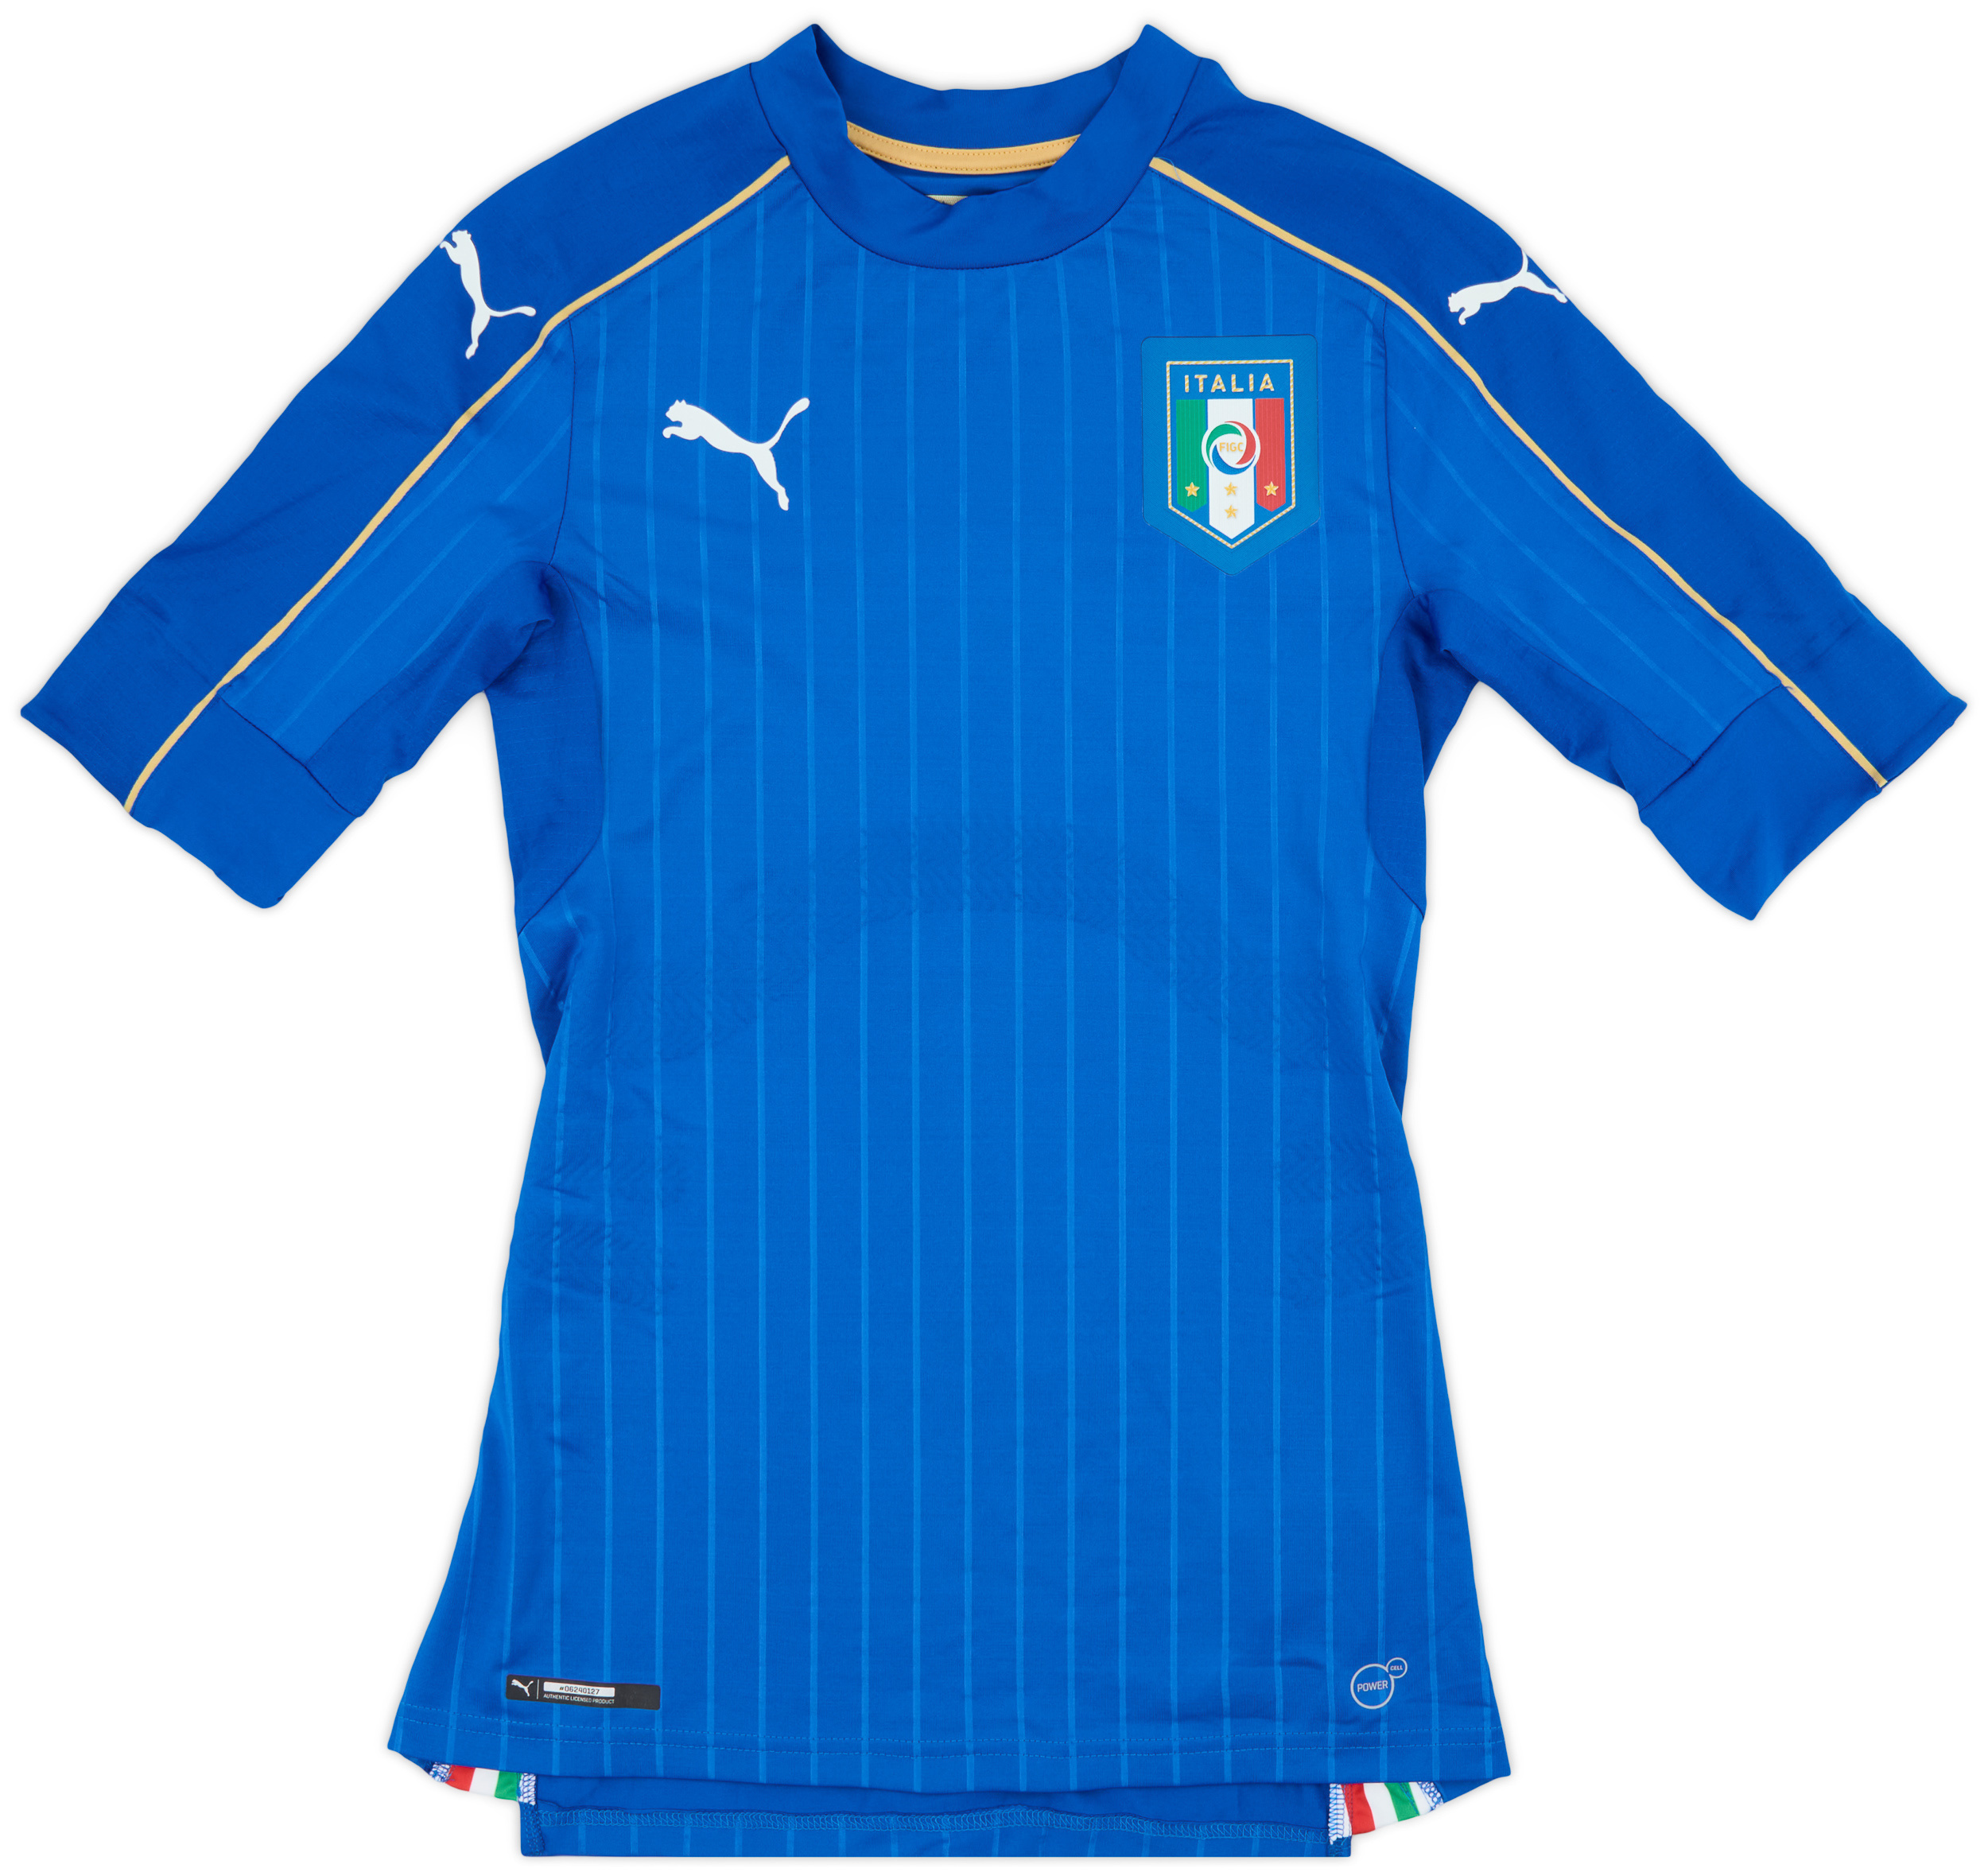 2016-17 Italy Authentic Home Shirt (ACTV Fit) - 8/10 - ()